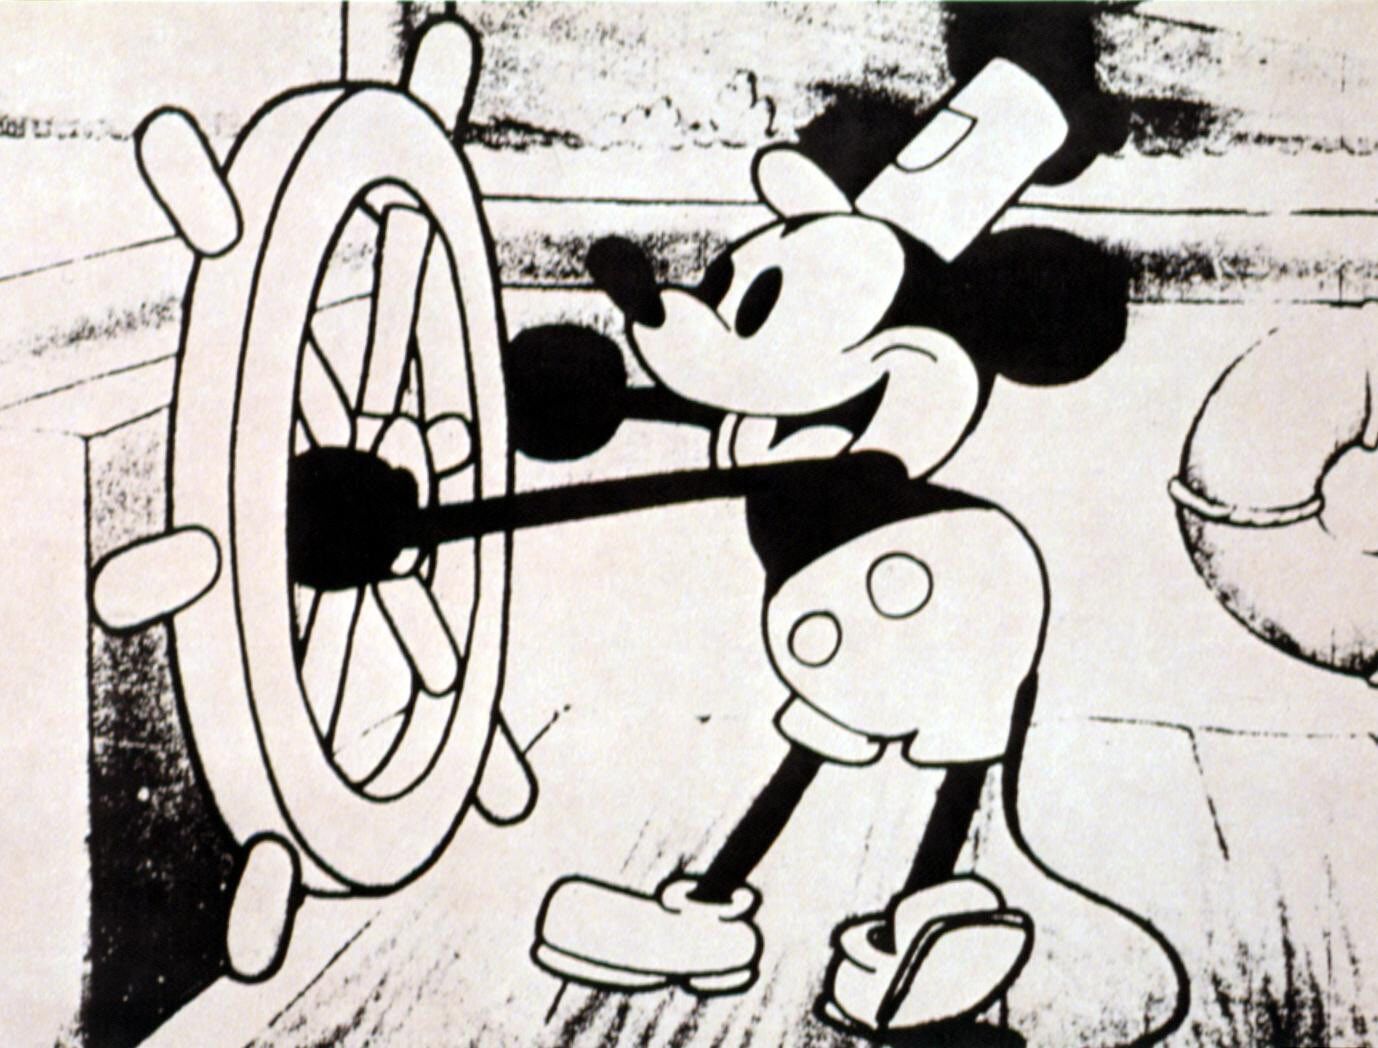 Republicans threaten Disney over Mickey Mouse copyright - Los Angeles Times